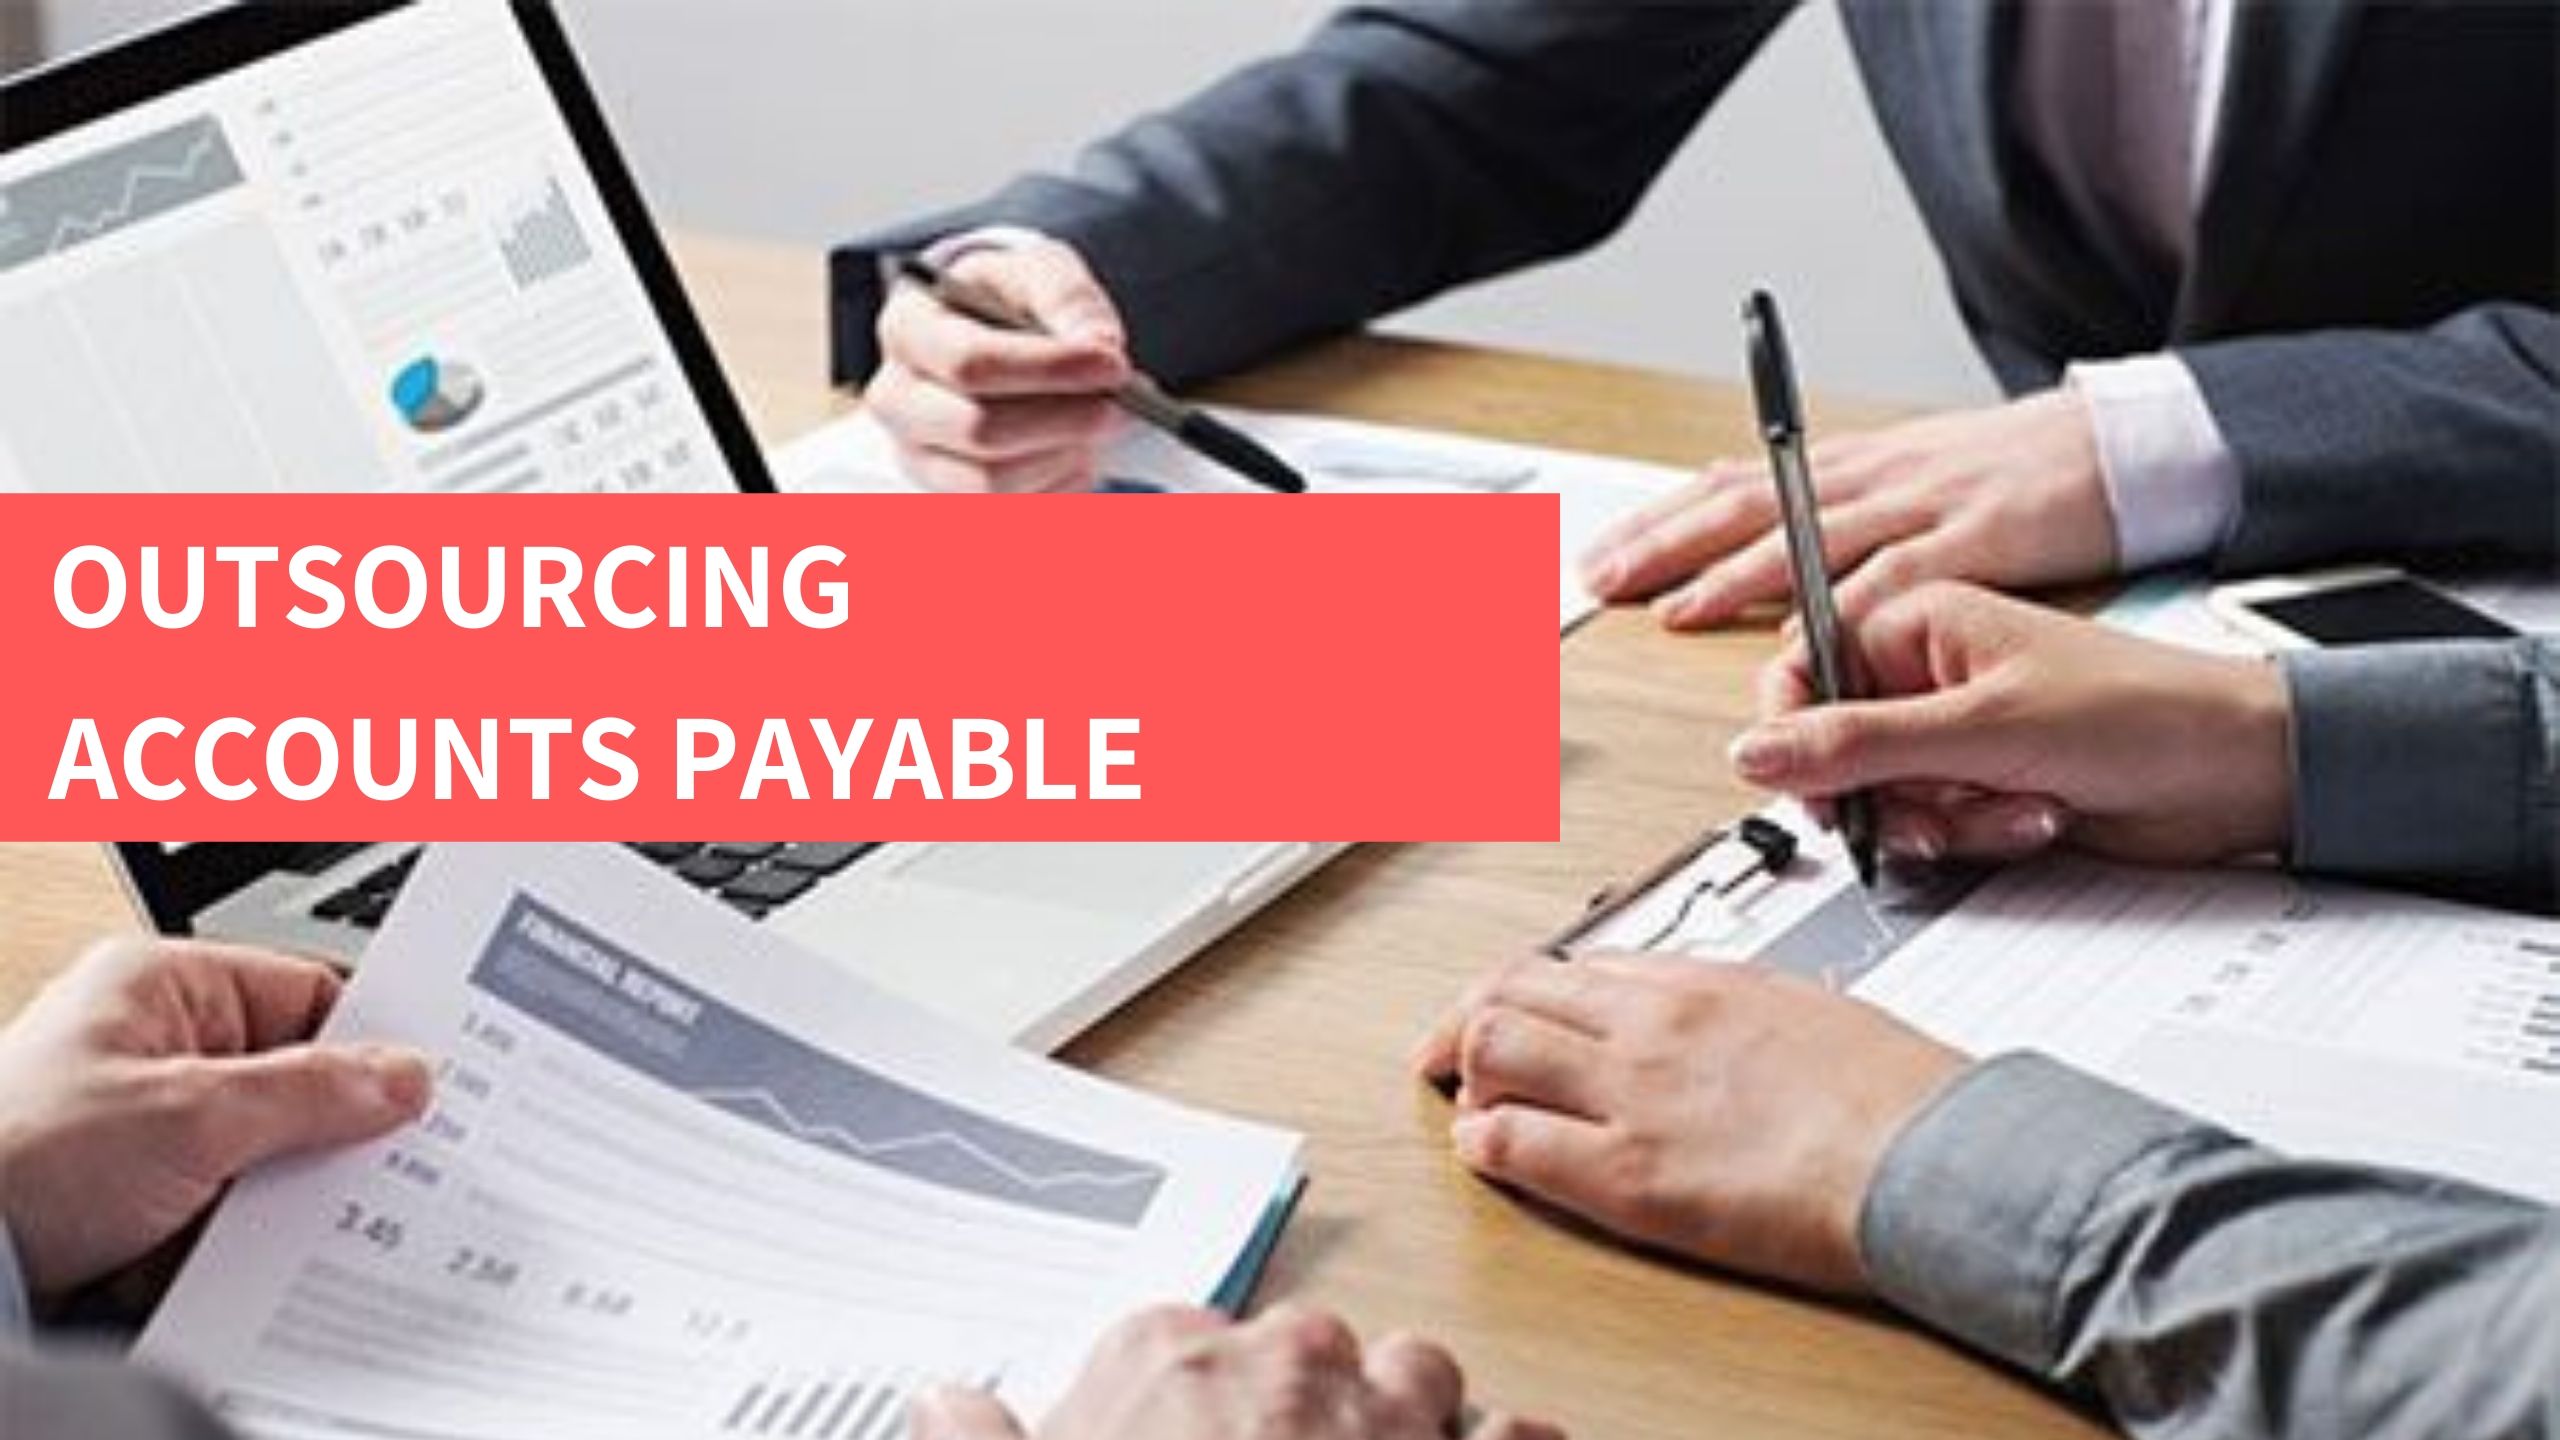 Outsourcing Accounts Payable Services